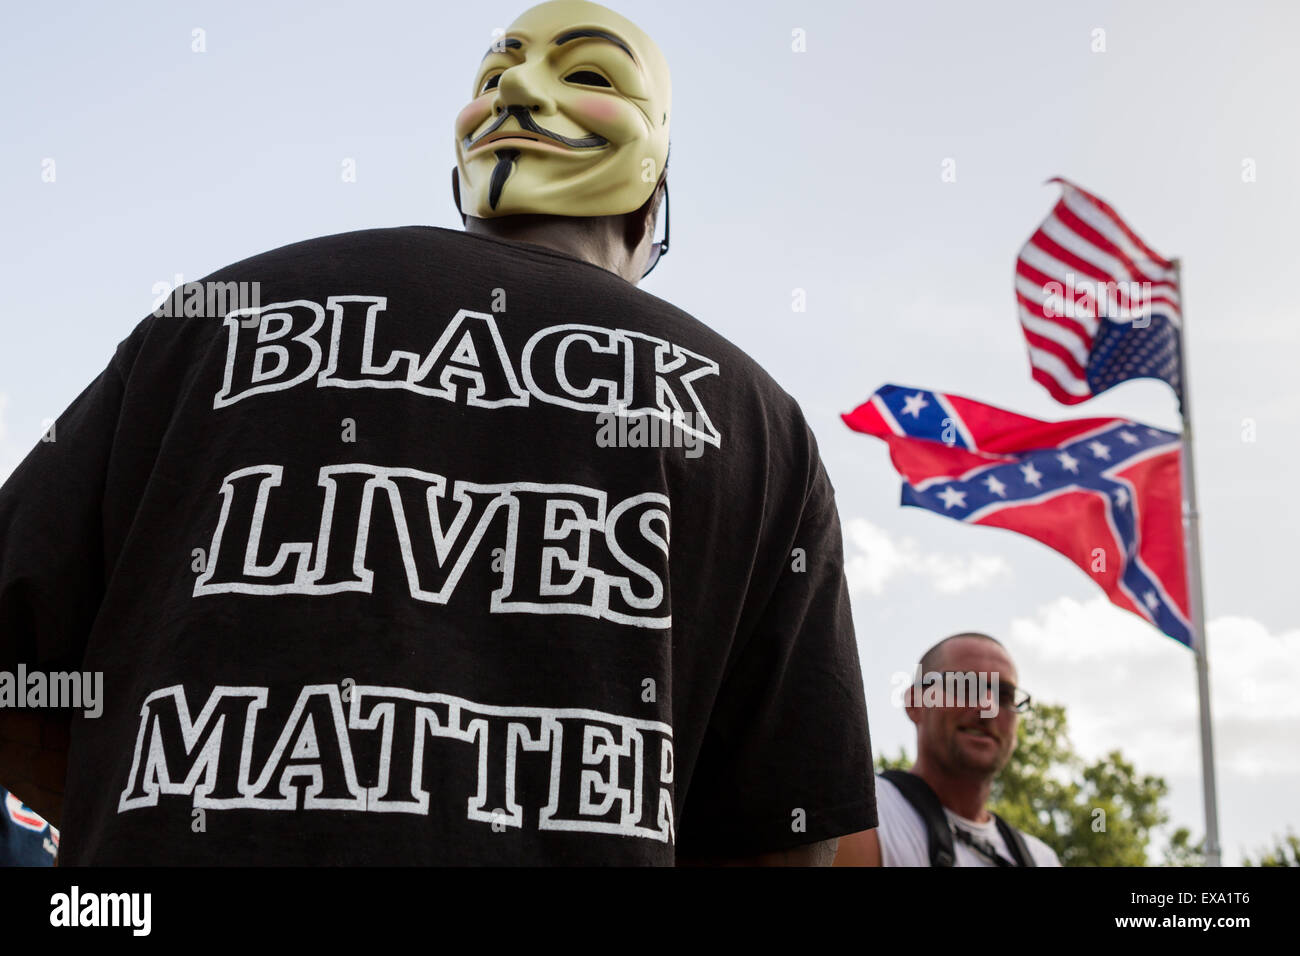 Columbia, South Carolina, USA. 09th July, 2015. A protester outside the South Carolina State House as Governor Nikki Haley signs into law a bill to remove the Confederate flag from the capitol July 9, 2015 in Columbia, SC. The movement to remove the symbol of white supremacy gained momentum after the shooting of nine black people in Charleston last month. Stock Photo